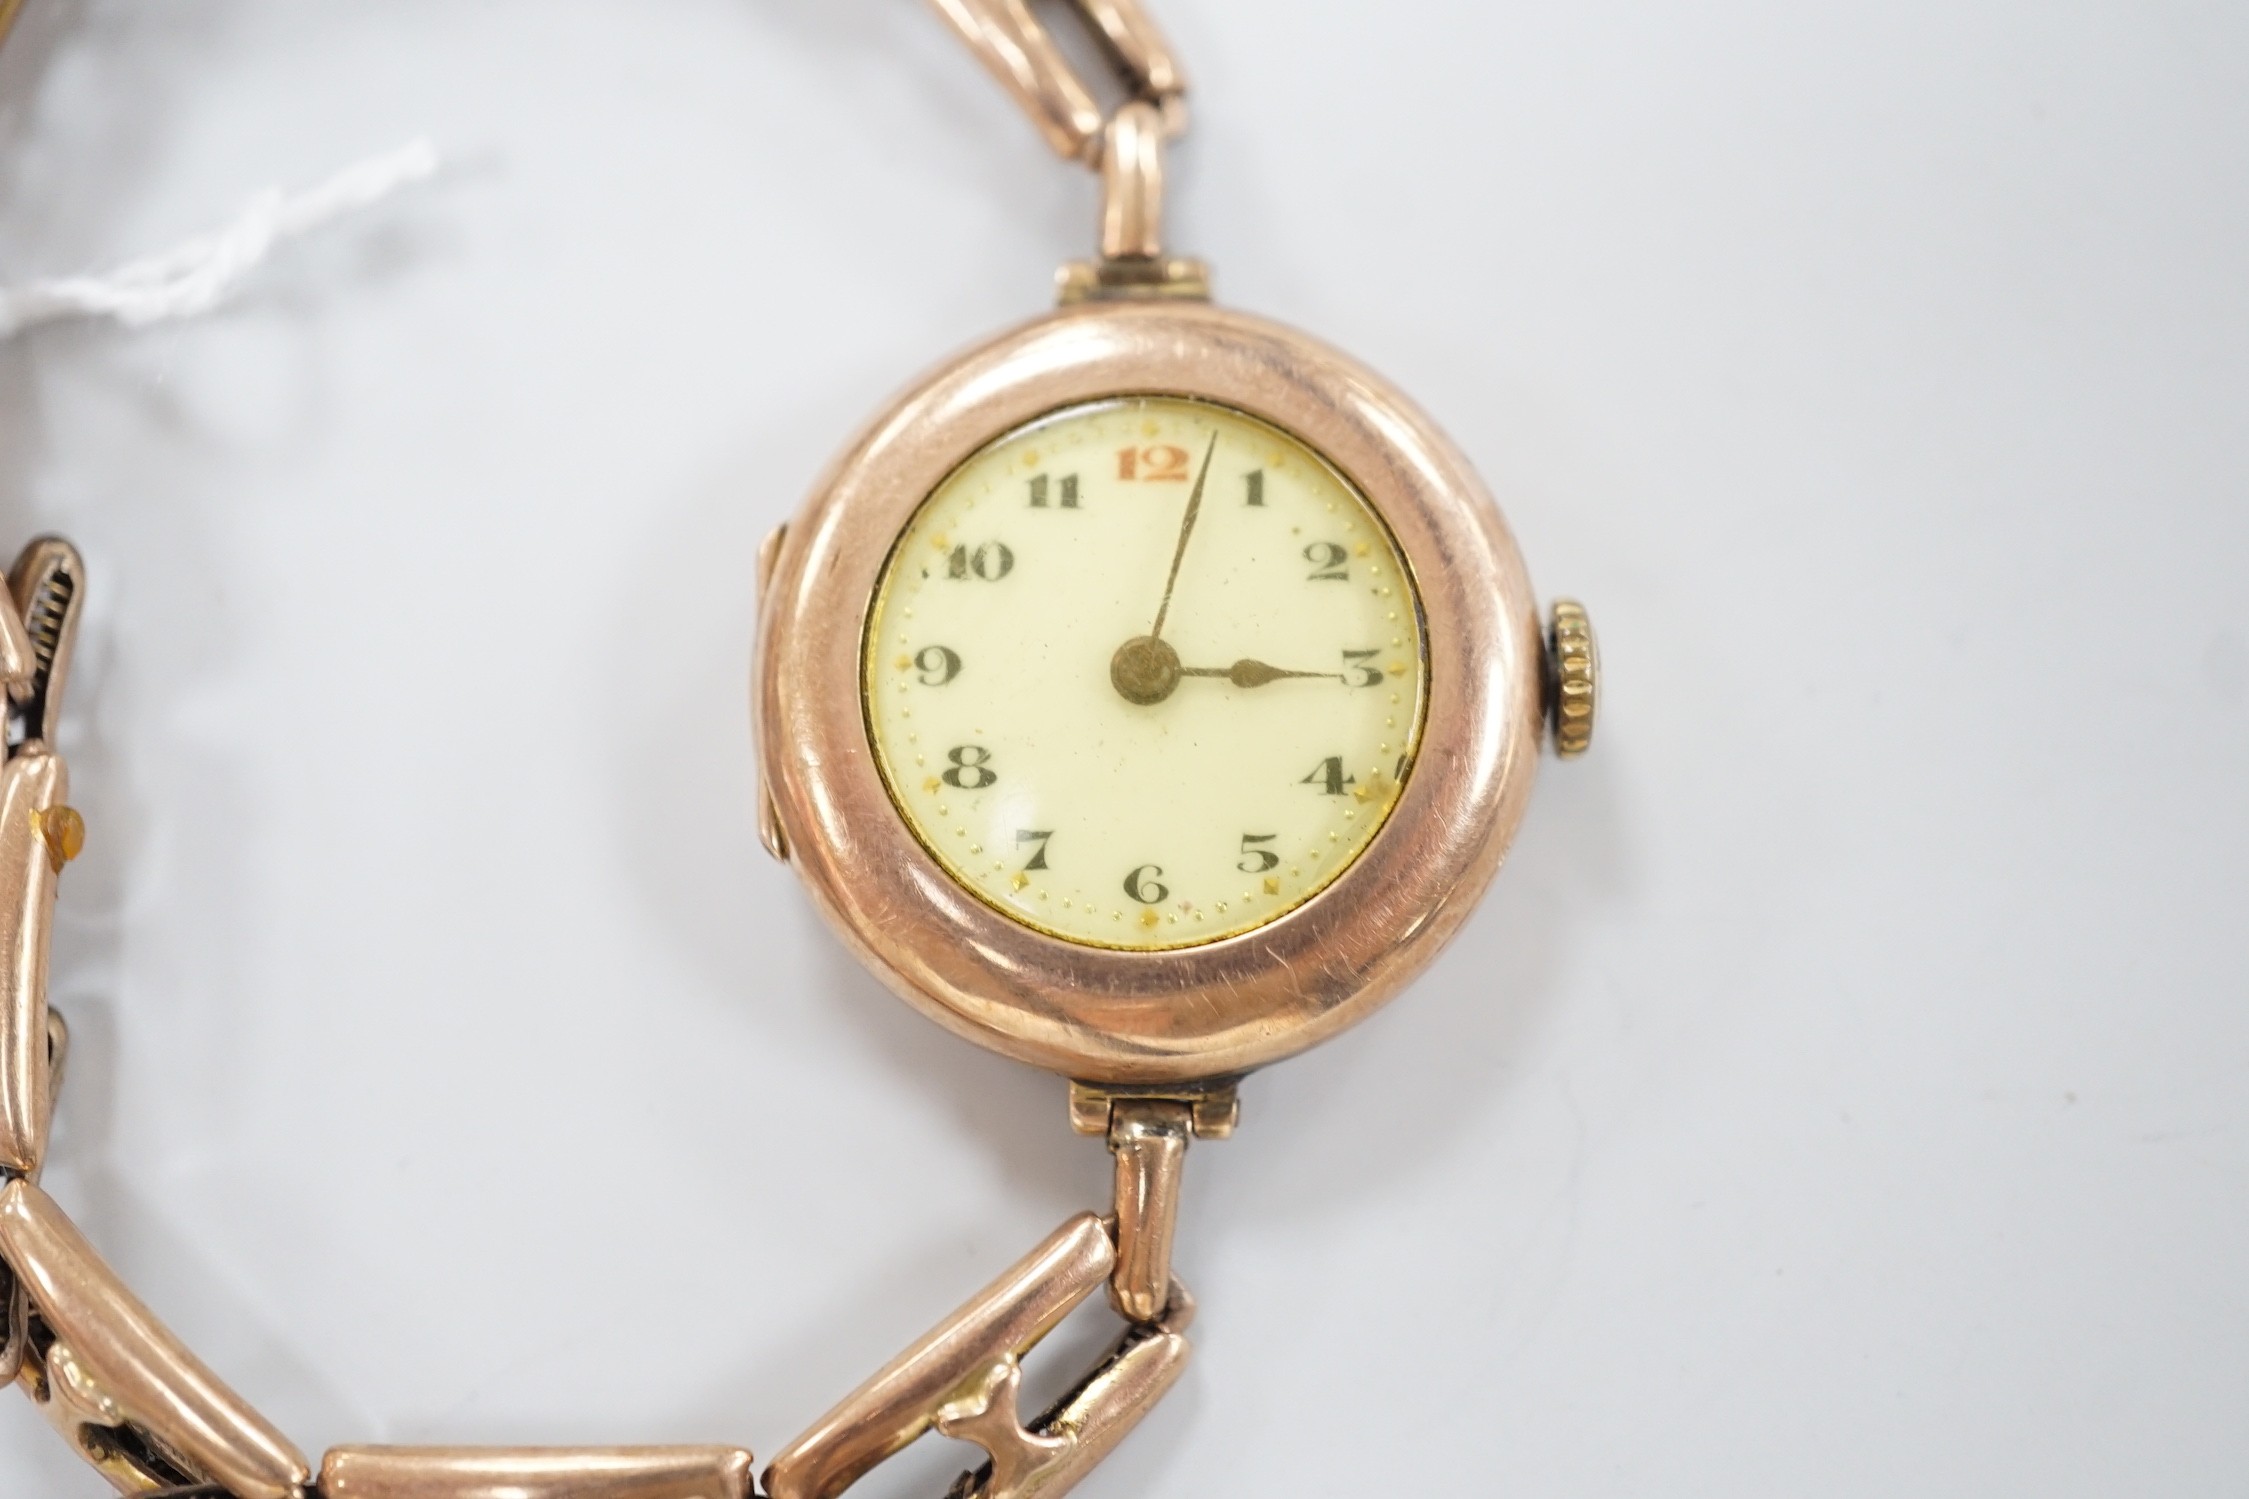 An early 20th century 9ct gold Rolex manual wind wrist watch, with Arabic dial, case diameter 27mm, on an expanding yellow metal bracelet, gross weight 22.1 grams.